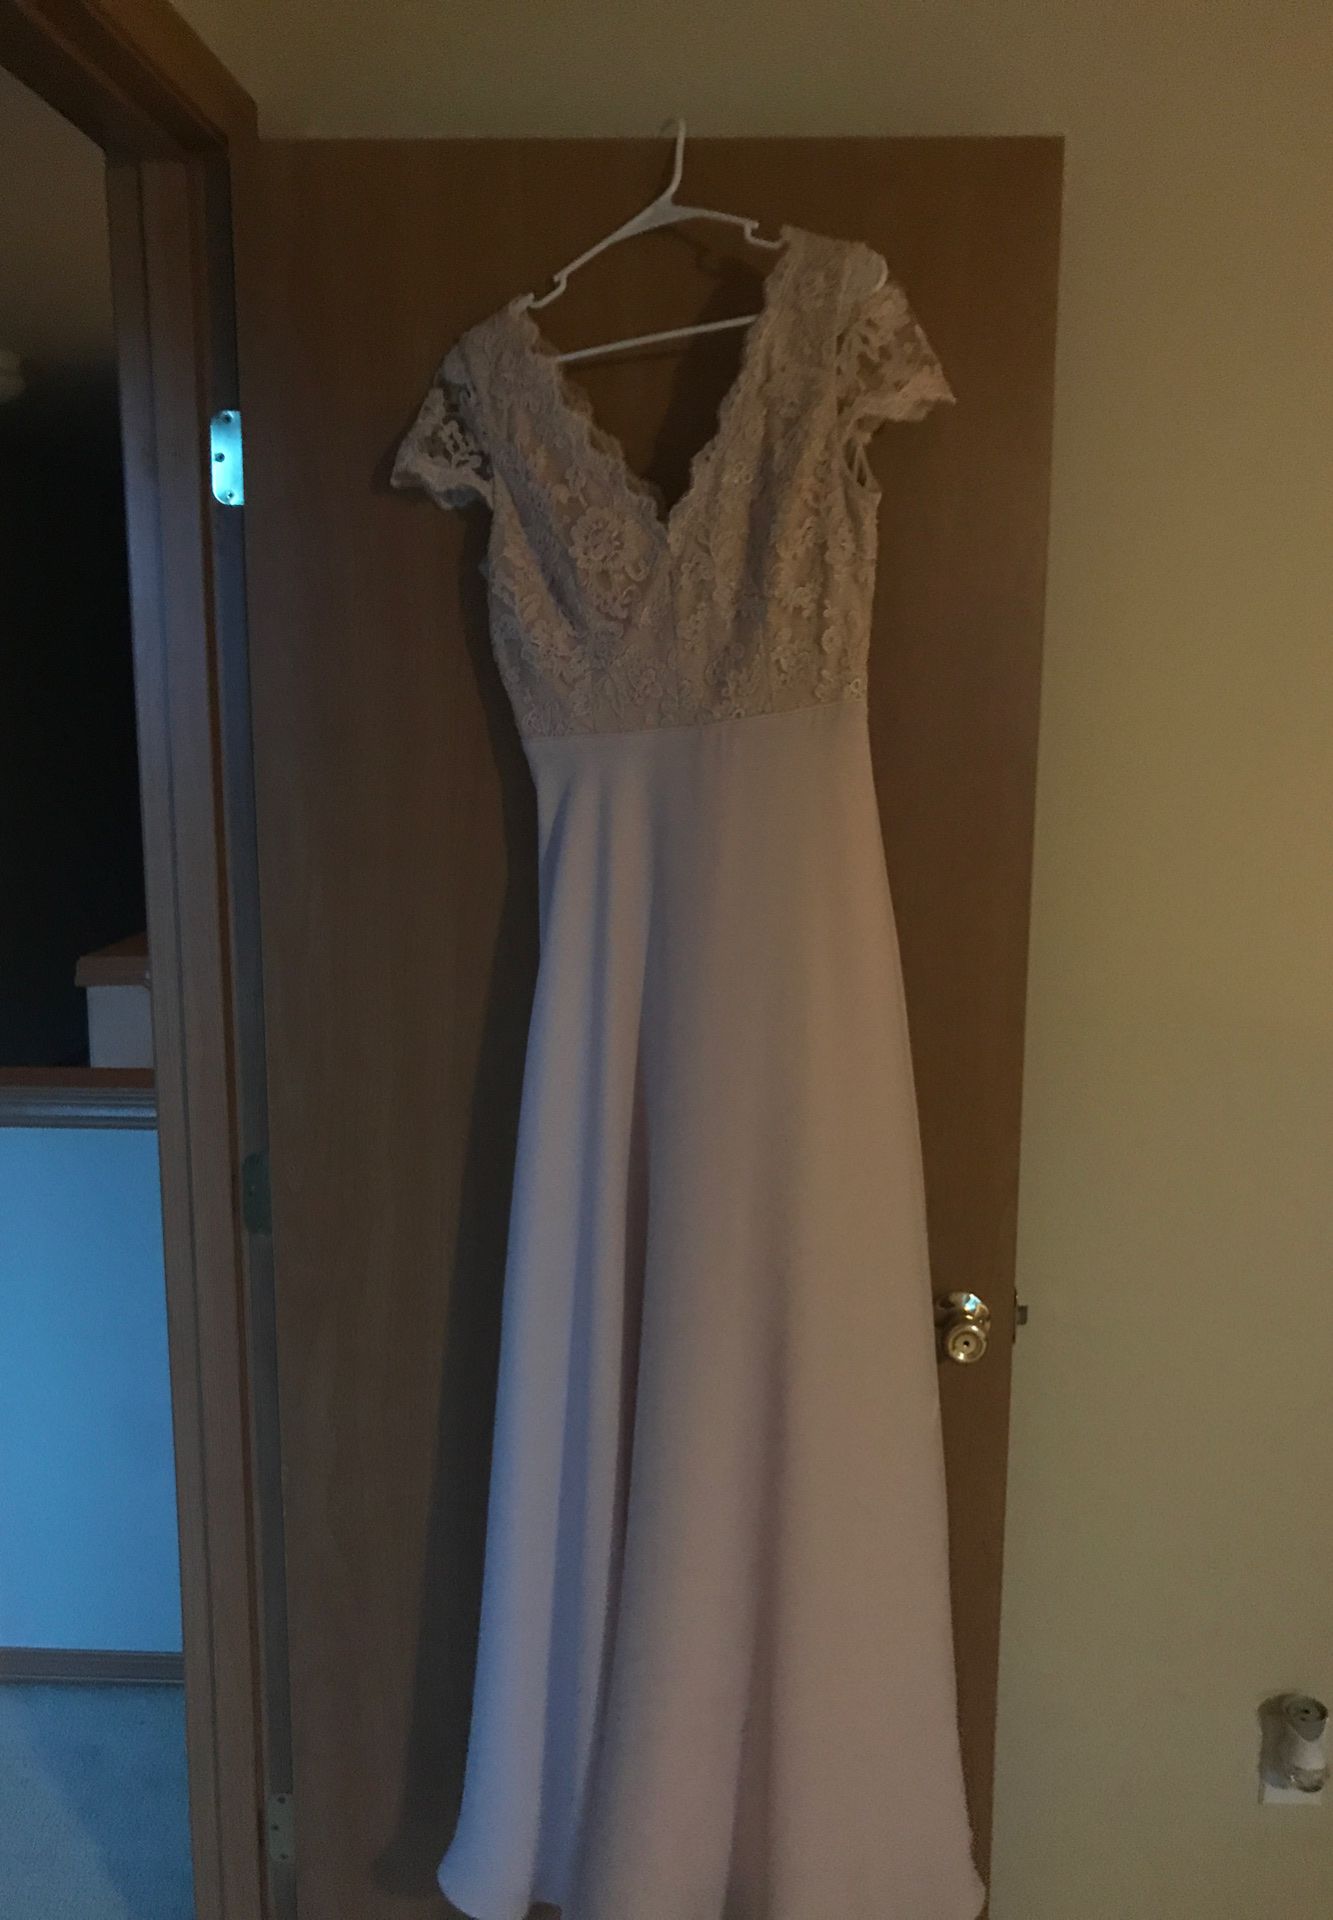 Beautiful light pink Calvin Klein dress. Asking $100, it was $150 brand new and worn once. In great shape. Pick up in Marysville.